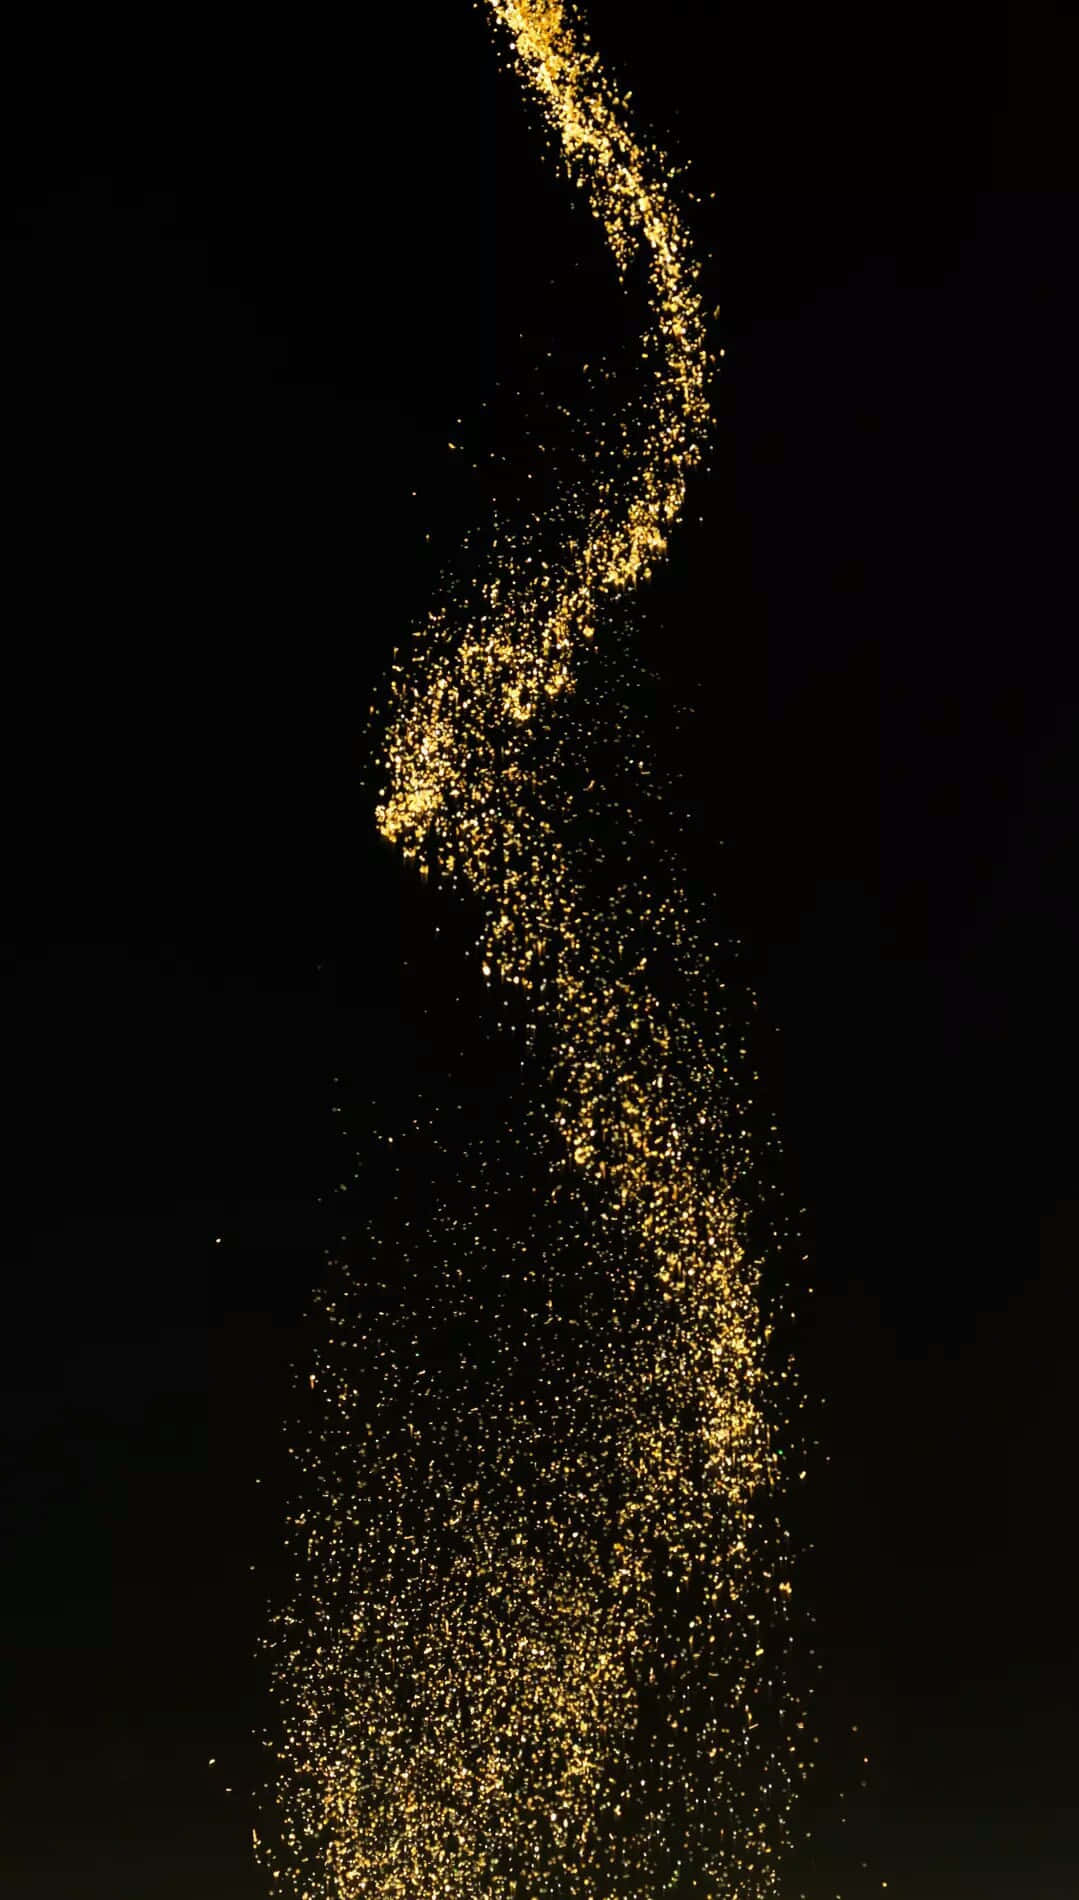 A Golden Dust Falling From The Sky